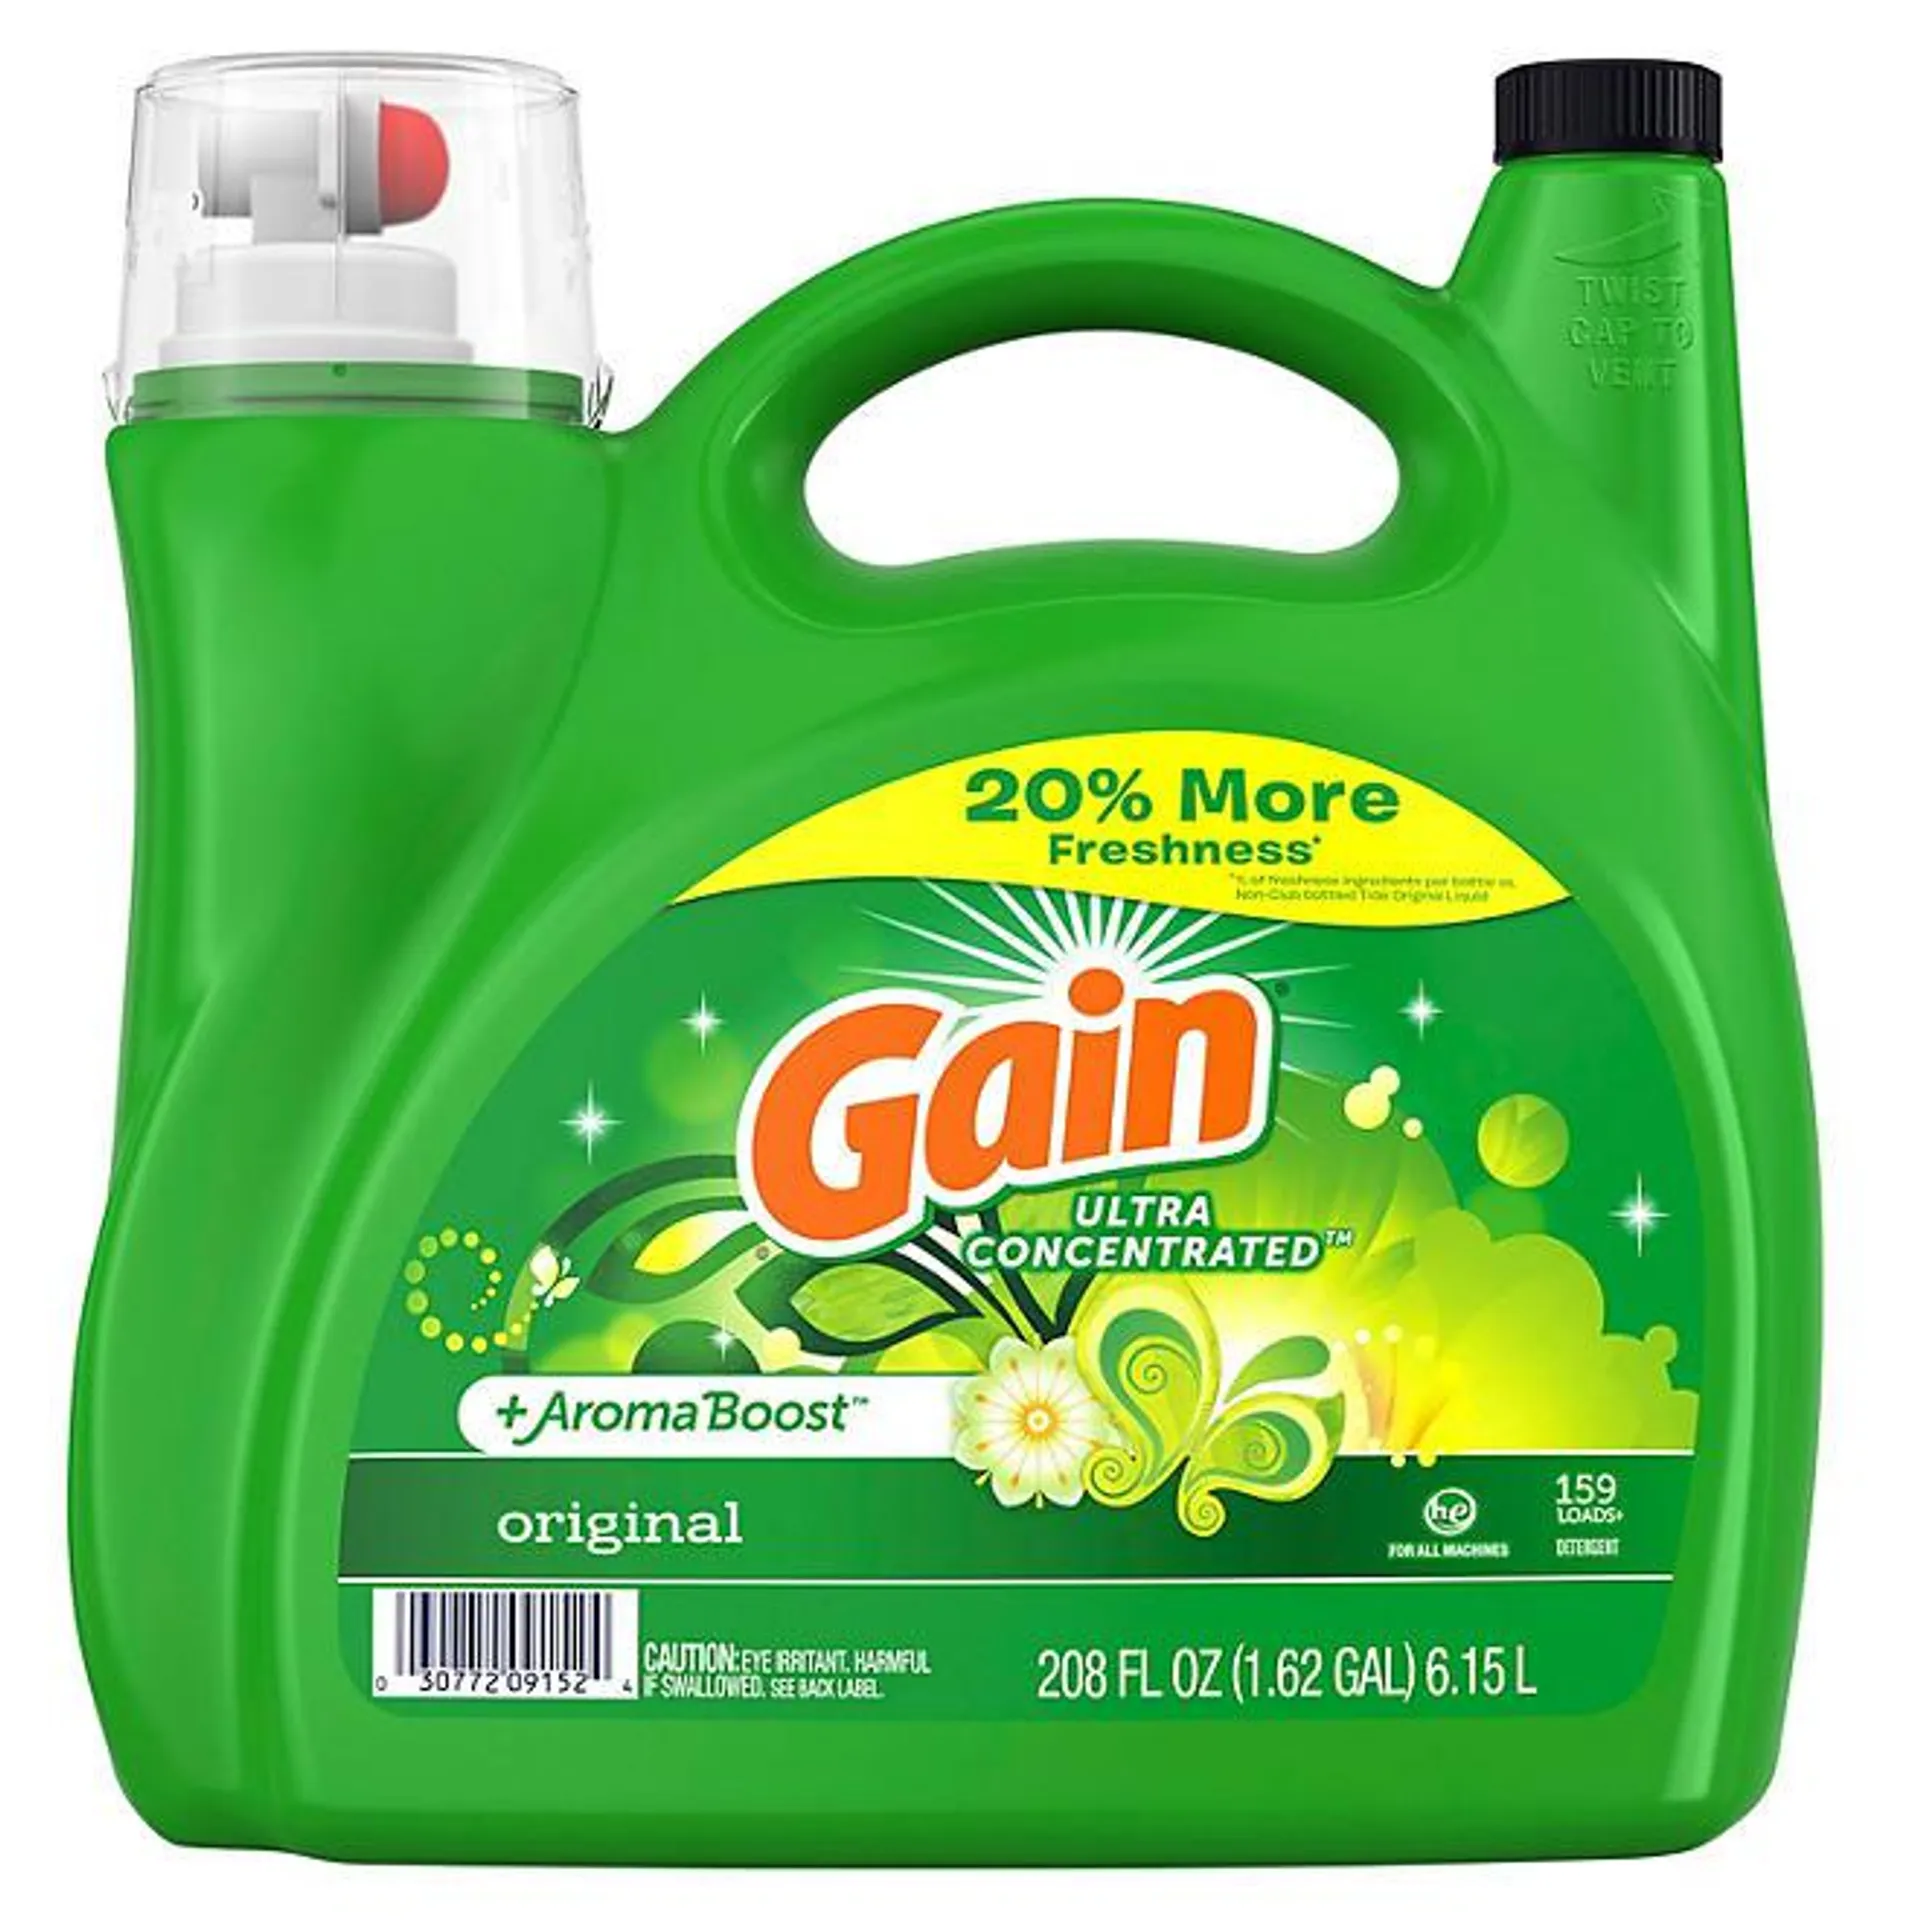 Gain Ultra Concentrated + Aroma Boost Laundry Detergent, Original Scent (208 fl. oz., 159 loads)